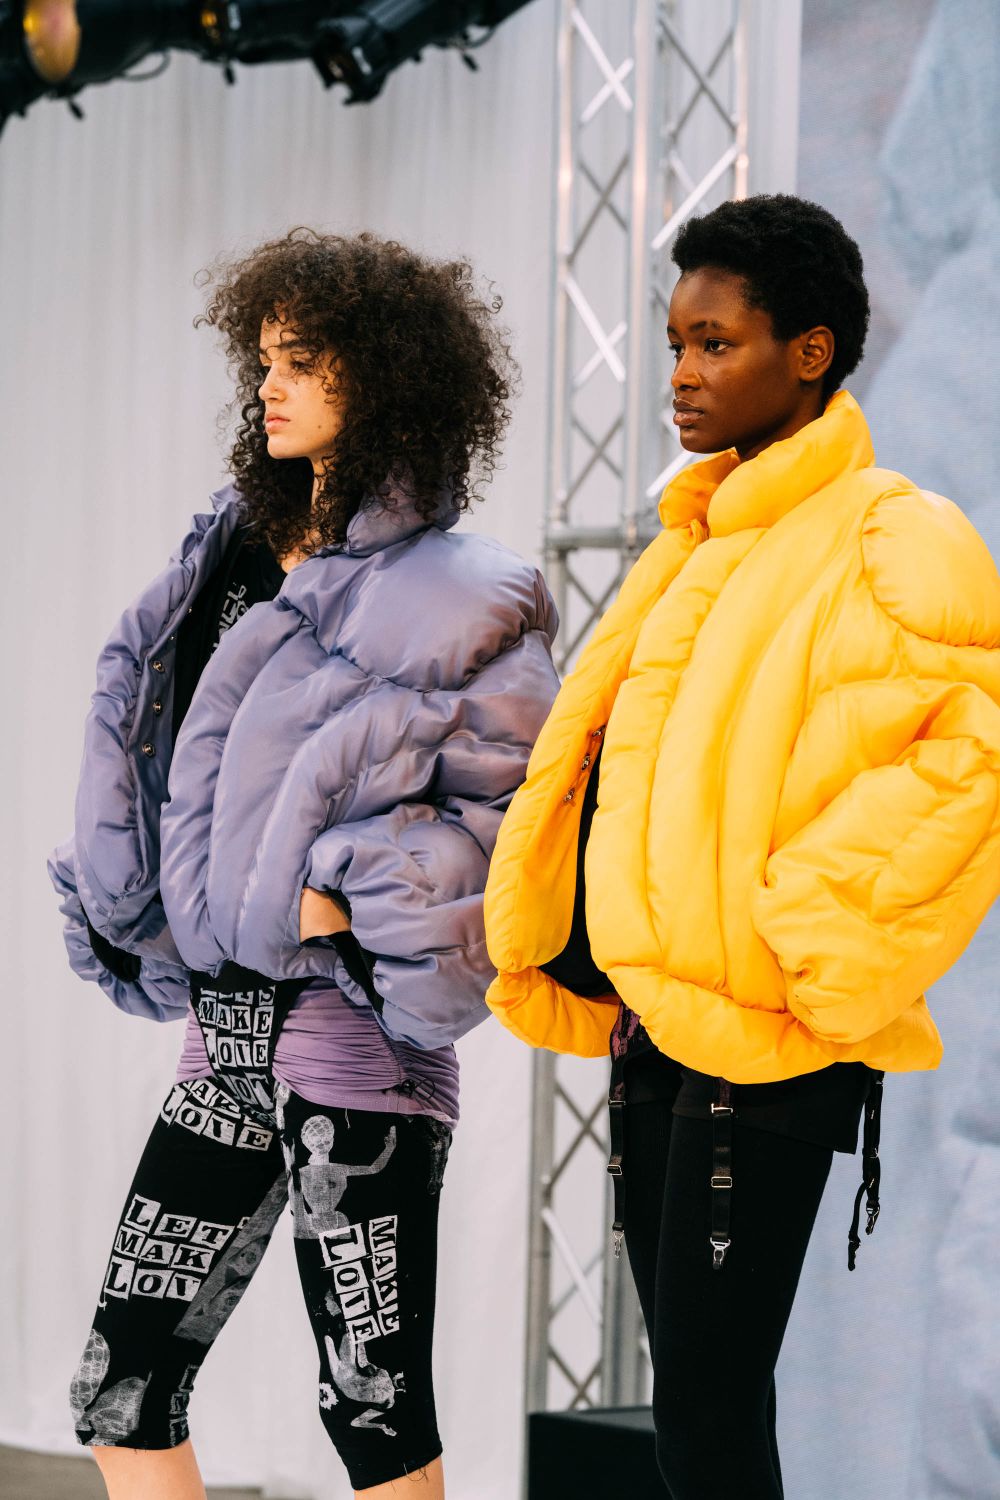 Two models on stage, wearing purple and orange puffer jackets